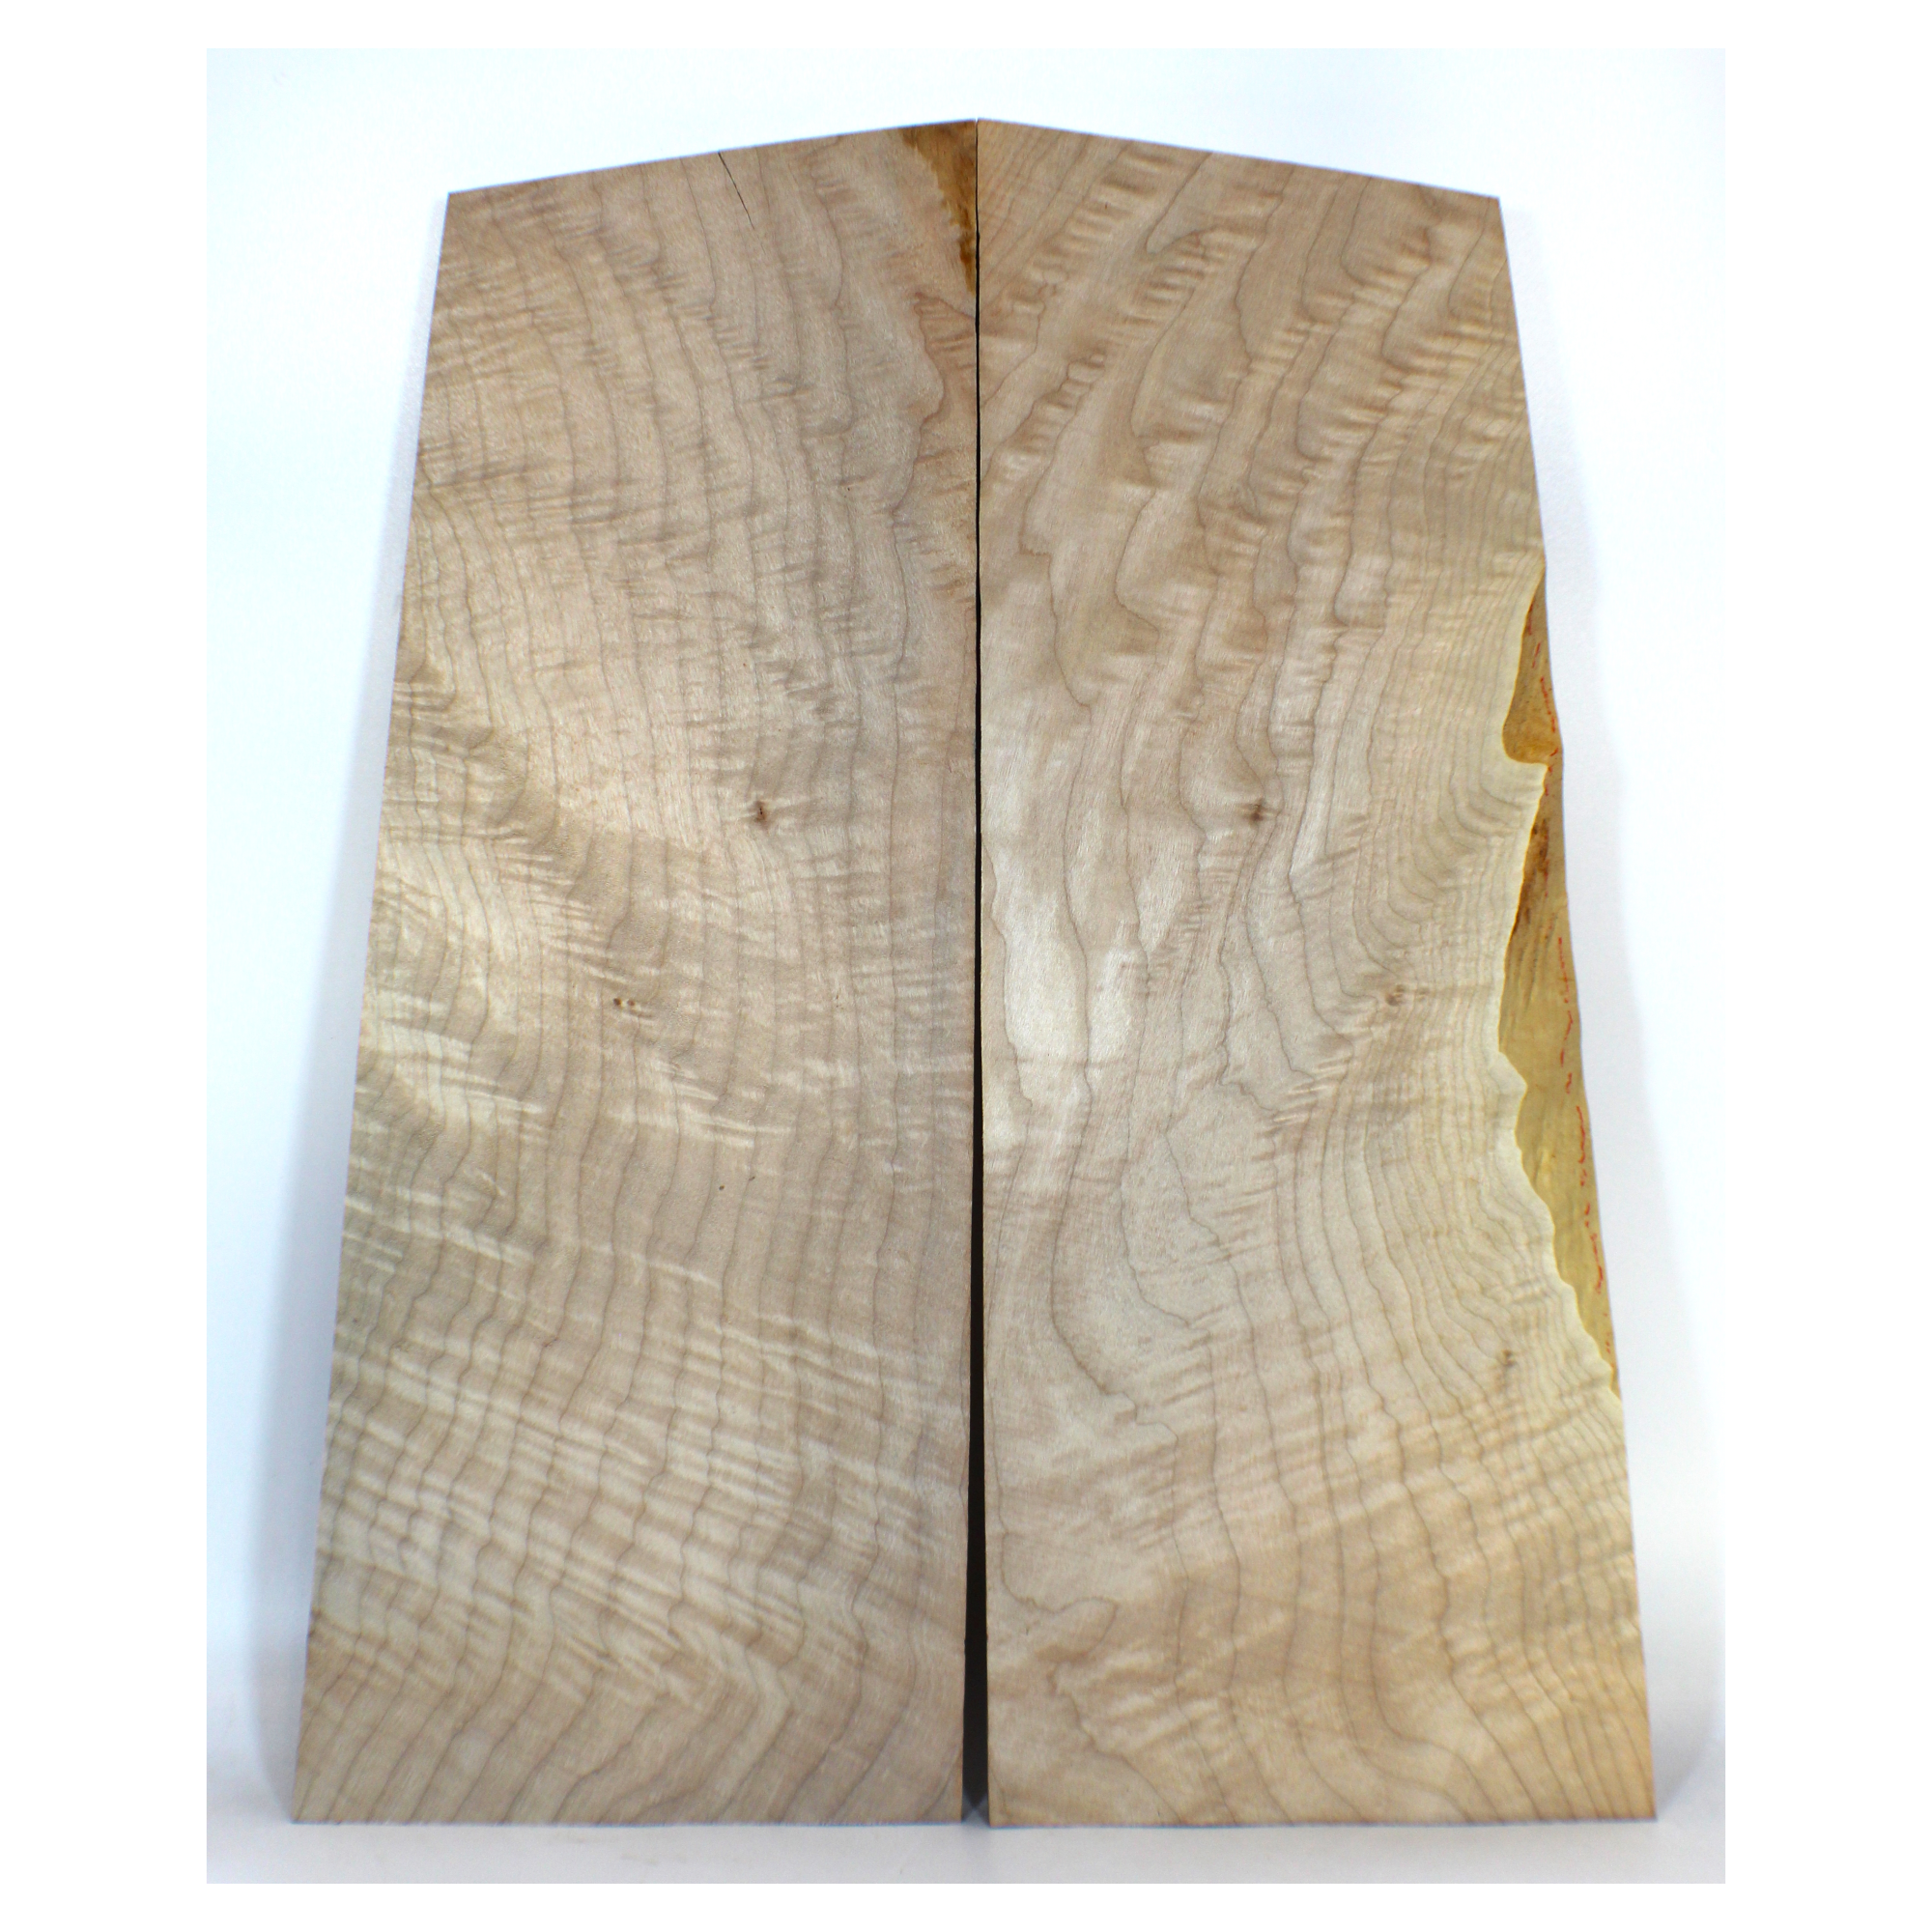 2-piece 3A flame maple book-matched set with consistent, light flat-sawn curl and bird pecks.  Dimensions: Thickness (each piece): .675